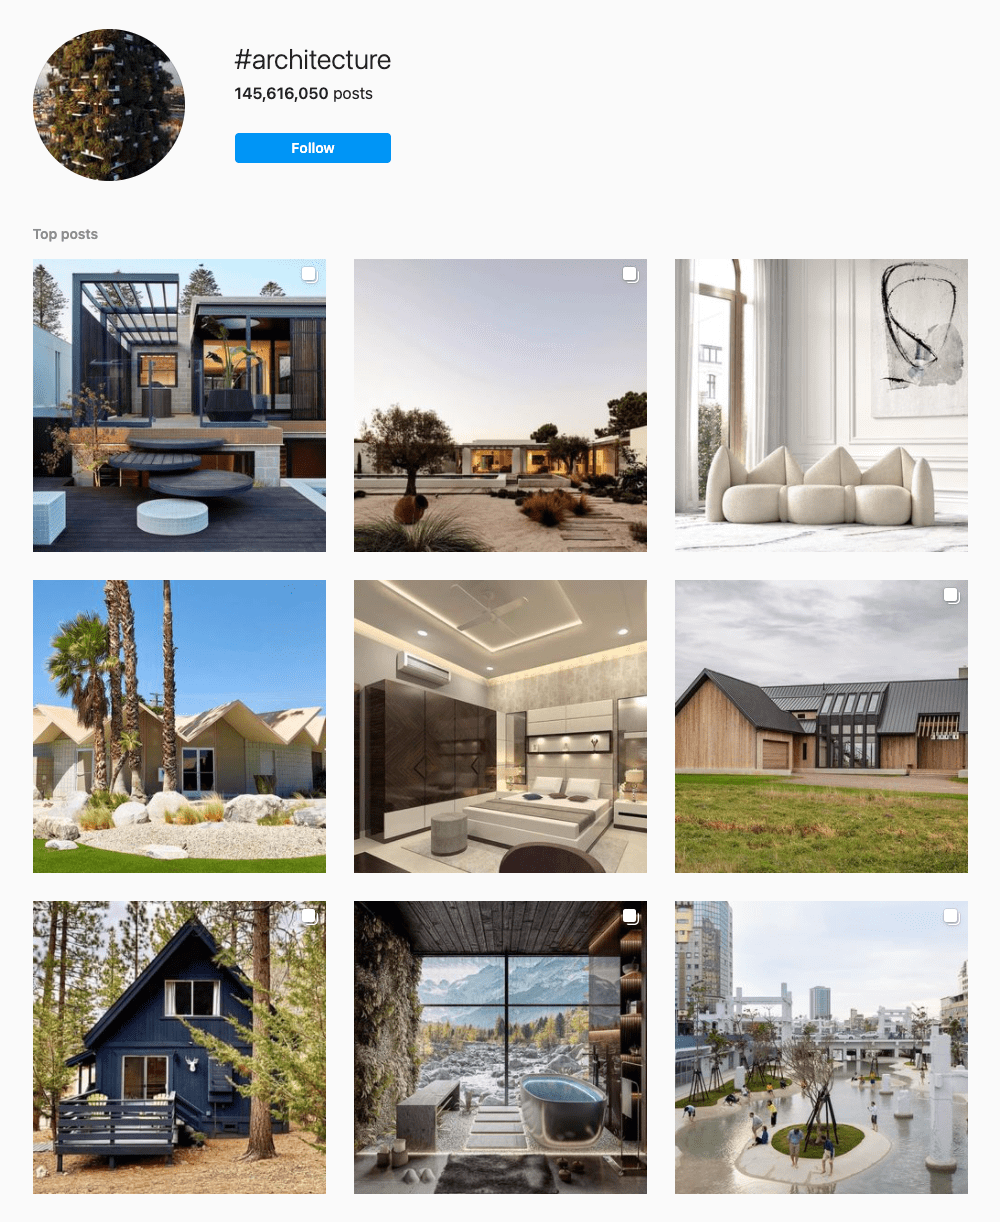 #architecture Hashtags for Instagram